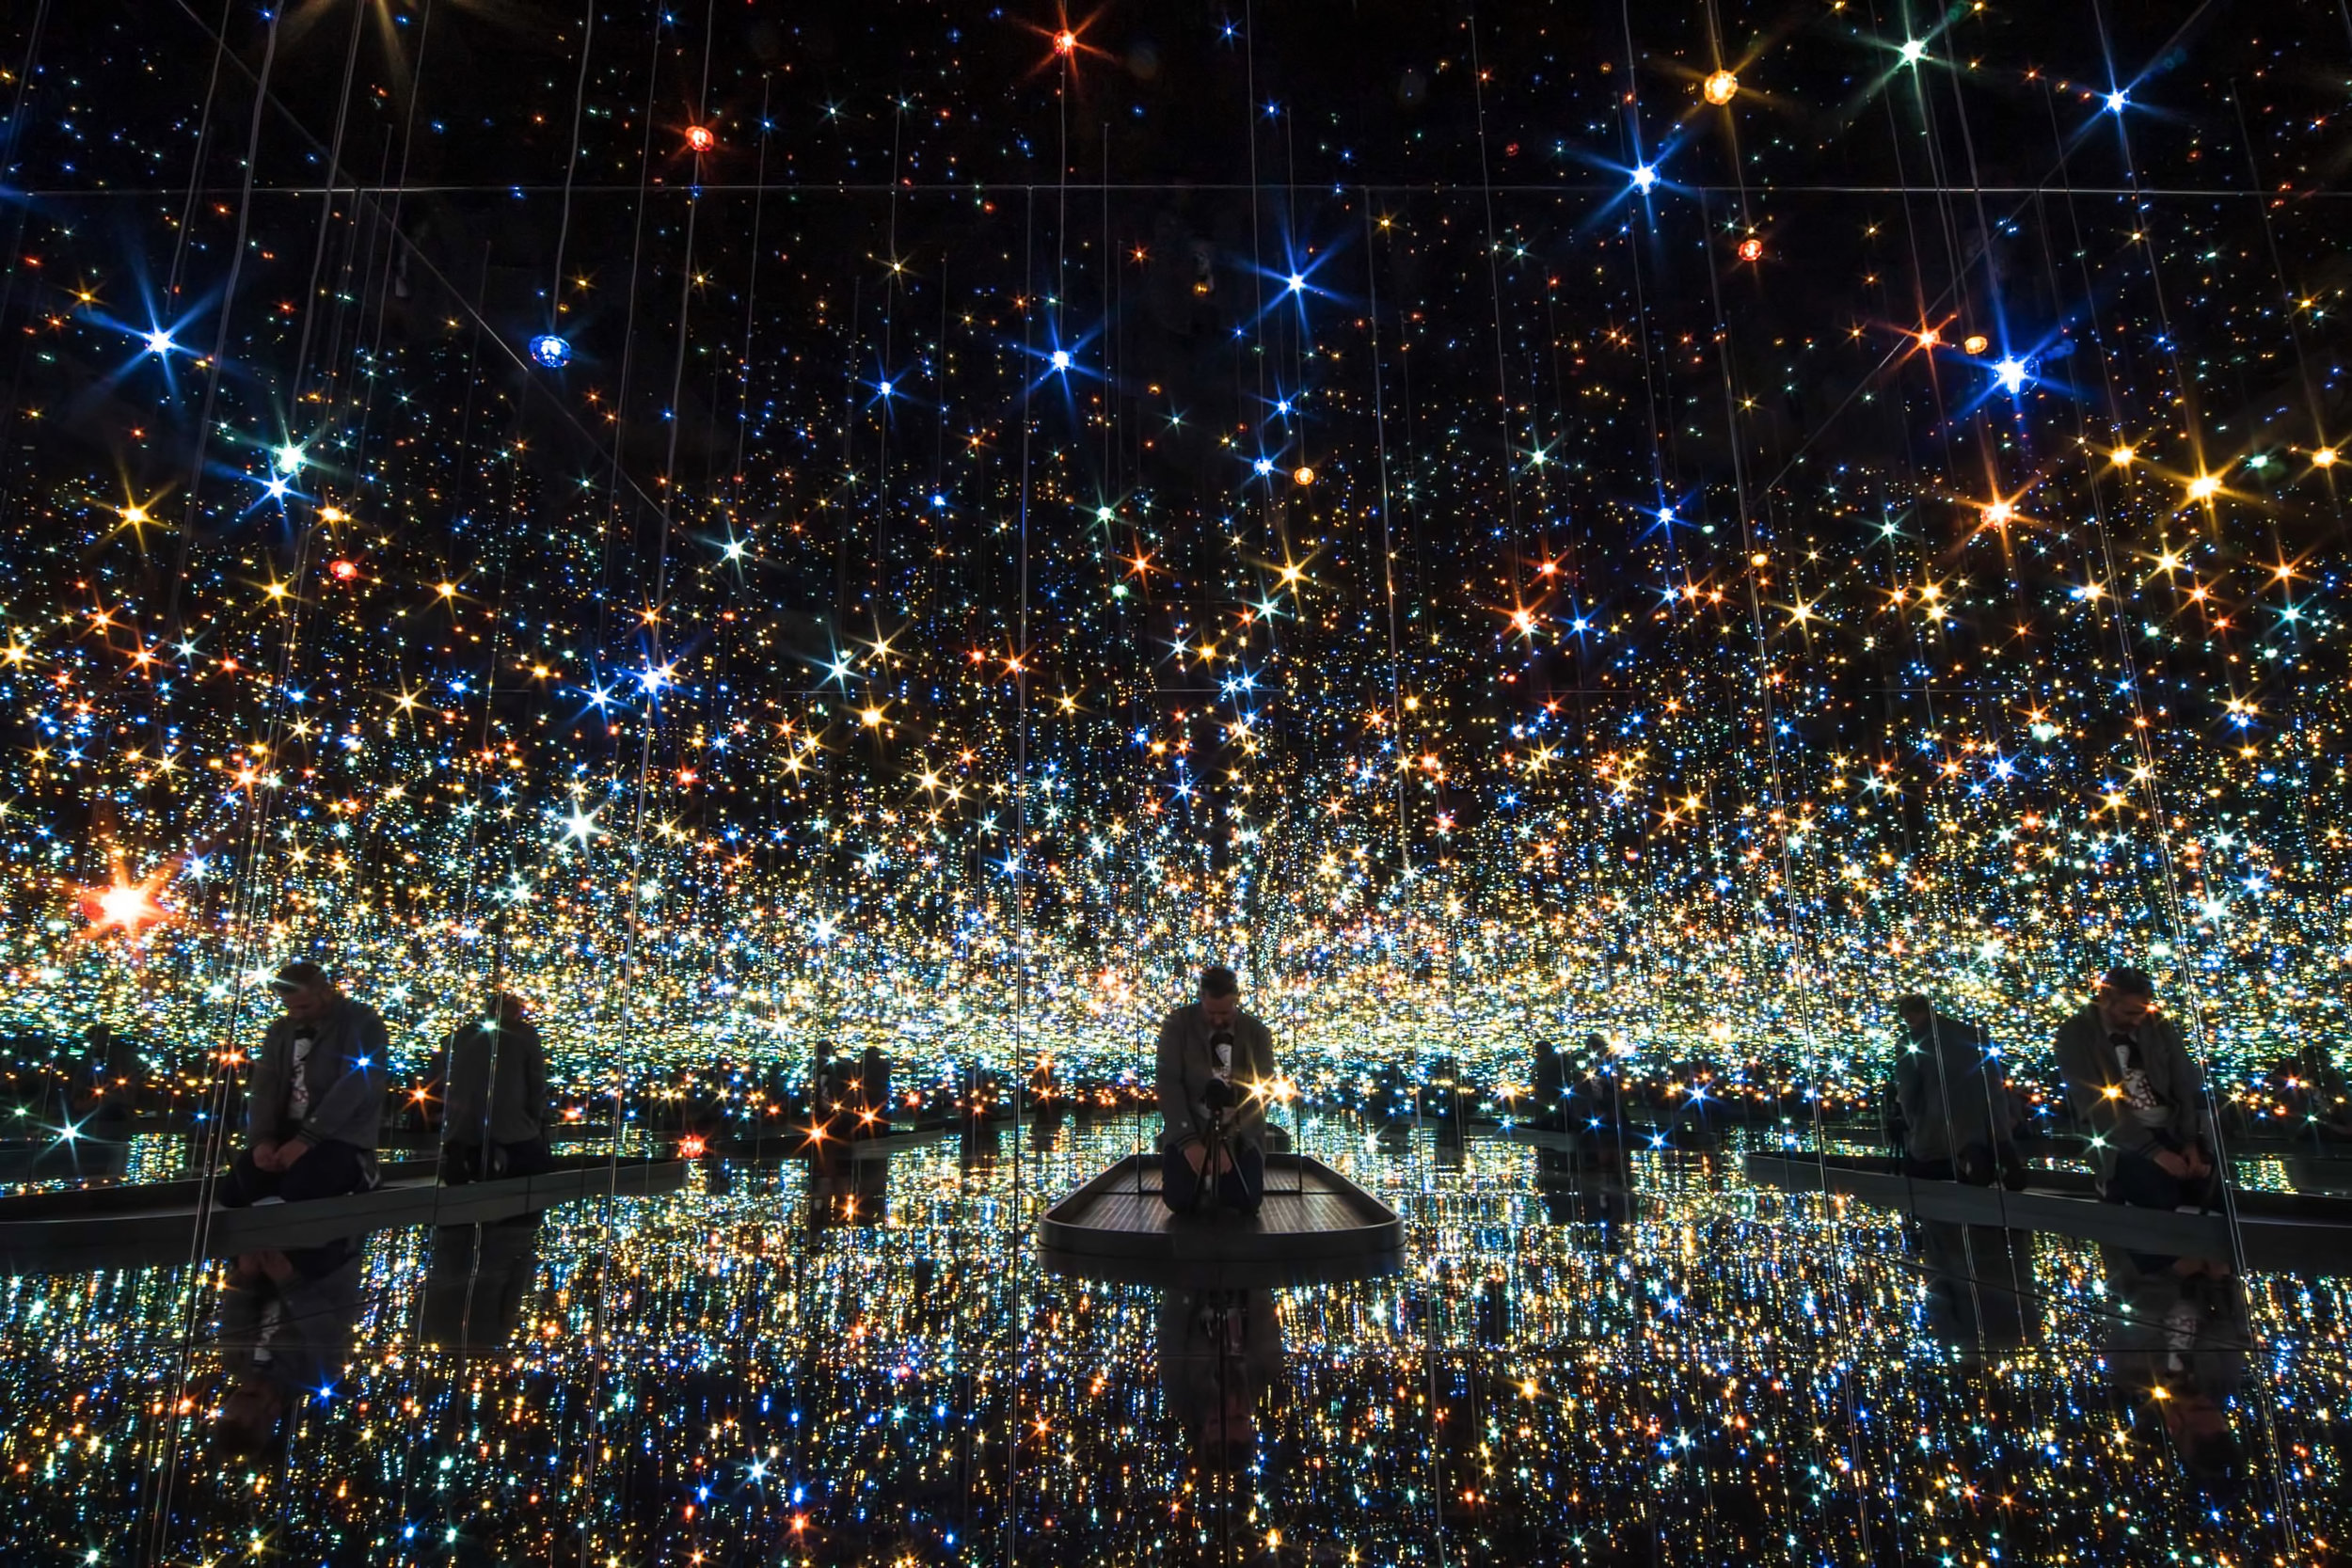  Infinity Mirrored Room — The Souls of Millions of Light Years Away 